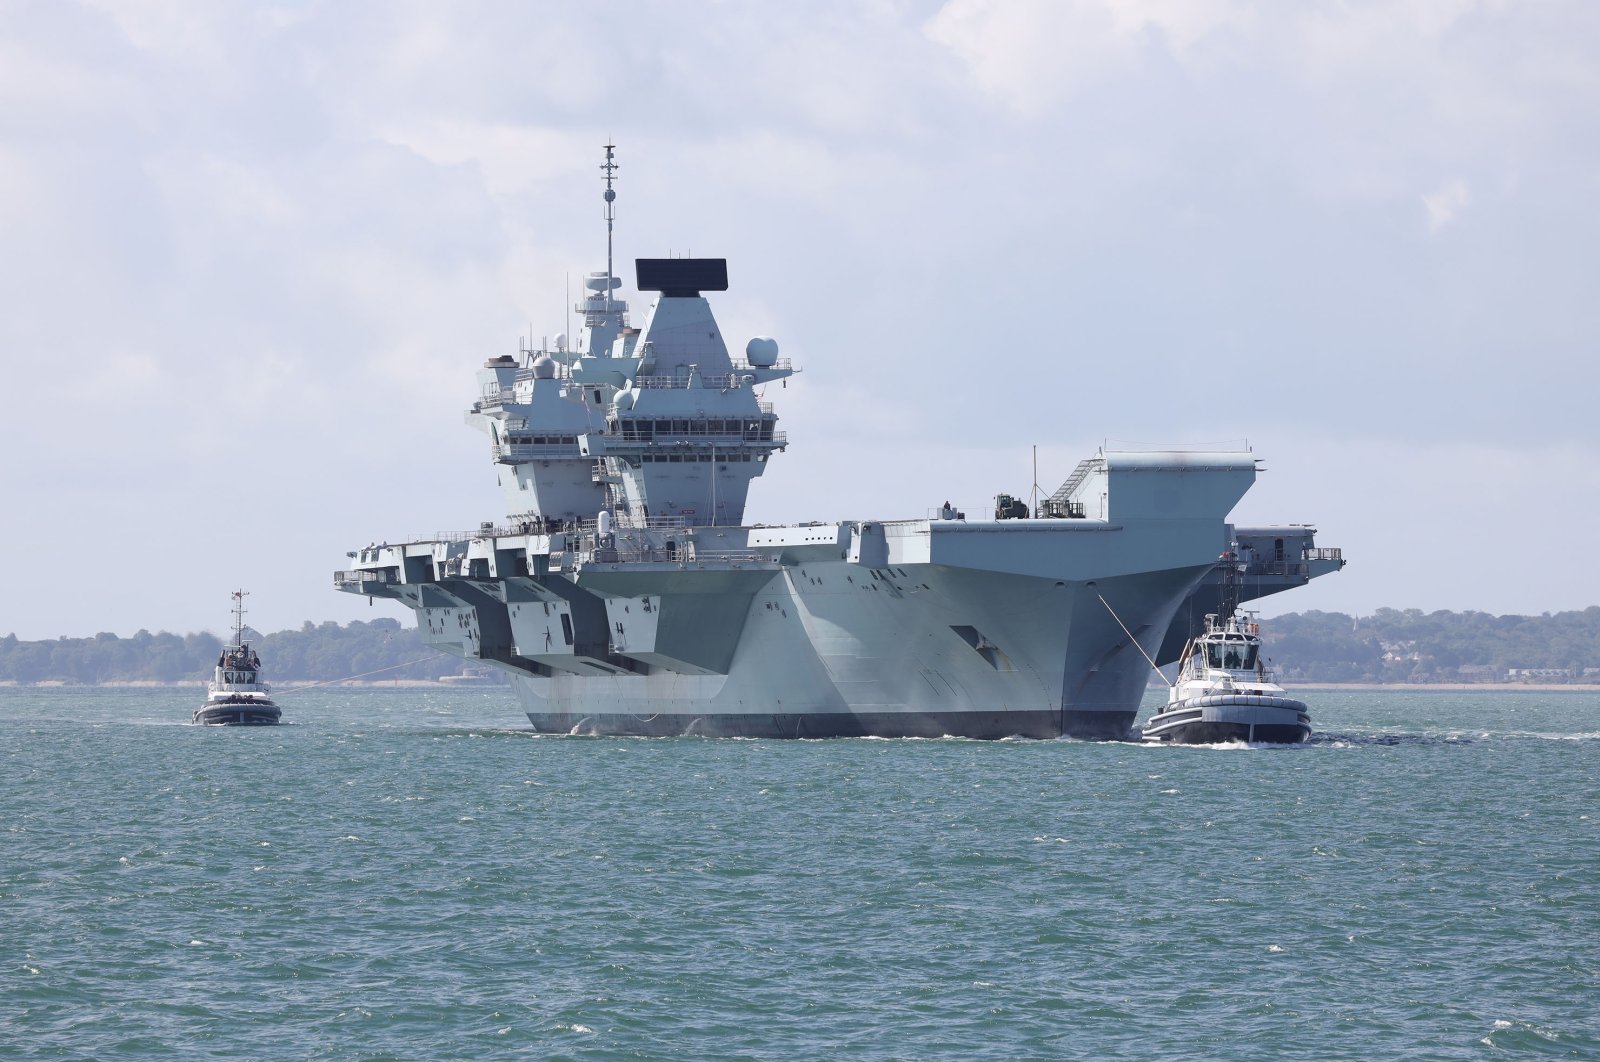 The aircraft carrier HMS Queen Elizabeth returns to its home port after the completion of Exercise Crimson Ocean, Portsmouth, Britain, July 2, 2020. (Shutterstock Photo)